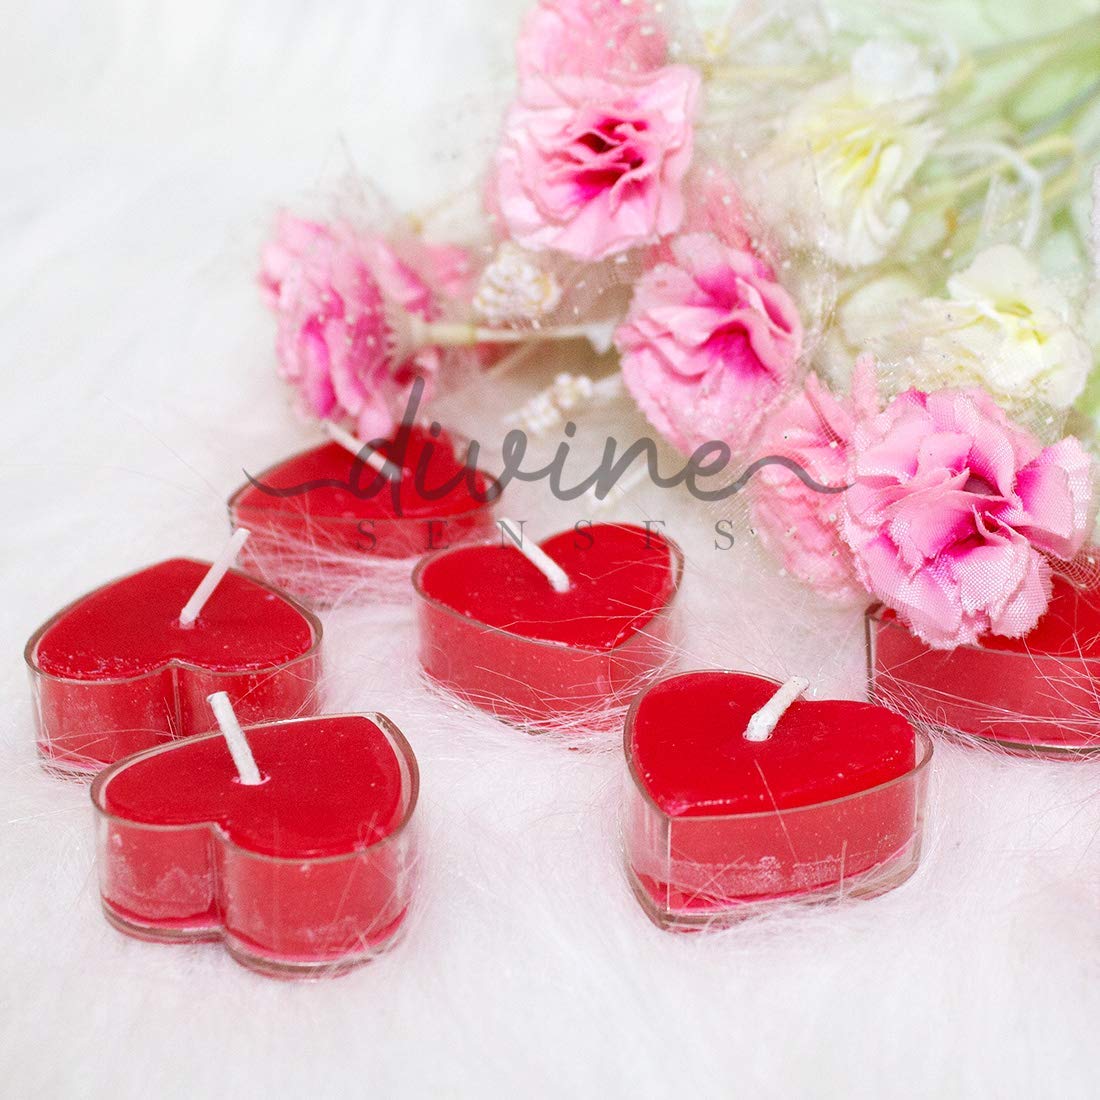 Rose & Lily Valentine's Day Candle & Heart Candles ( Pack of 8)